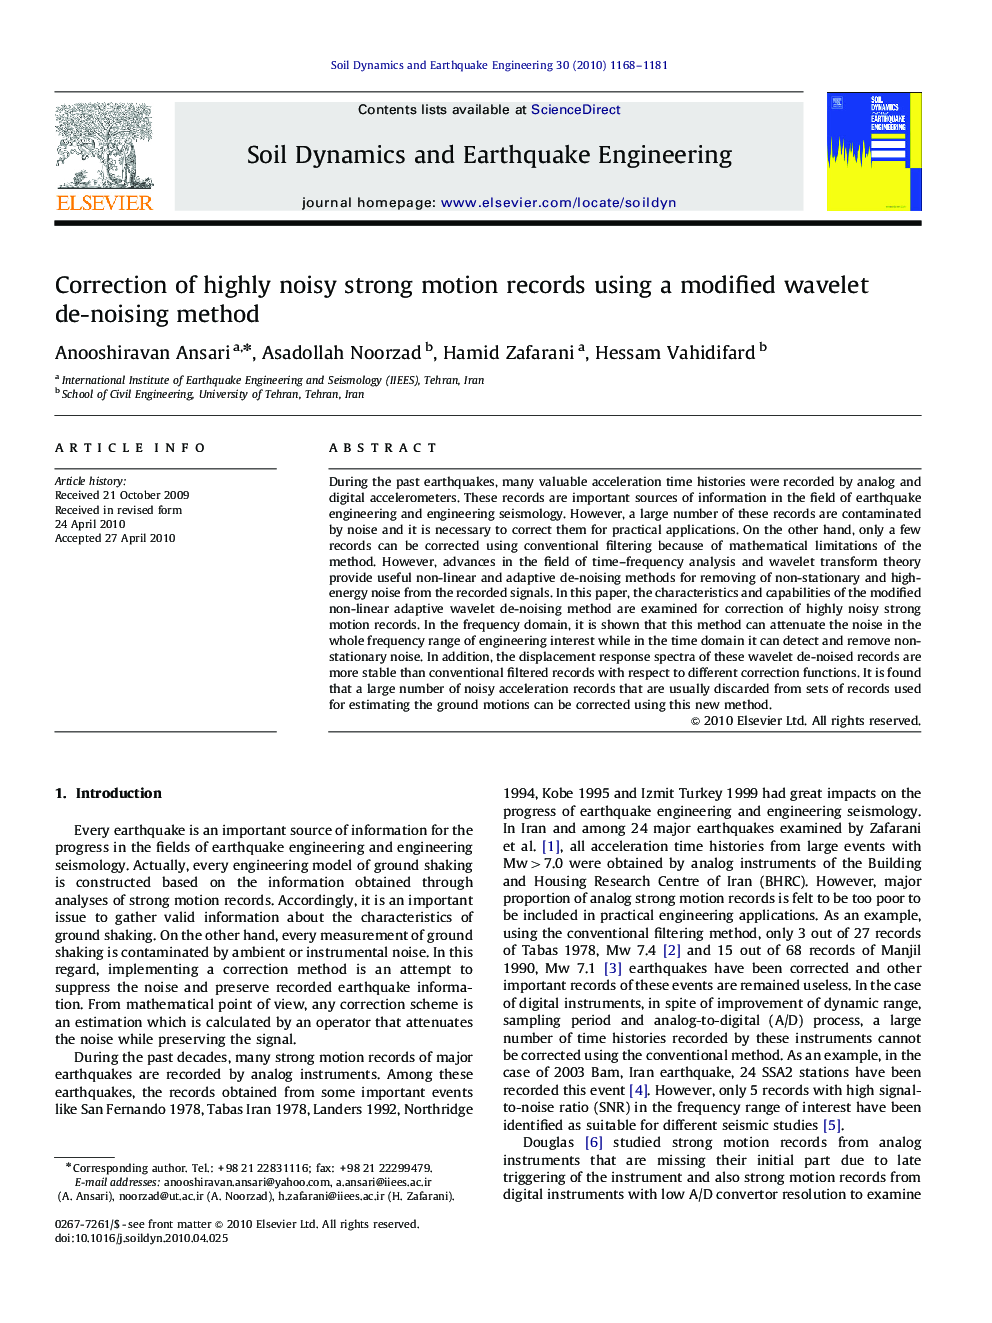 Correction of highly noisy strong motion records using a modified wavelet de-noising method